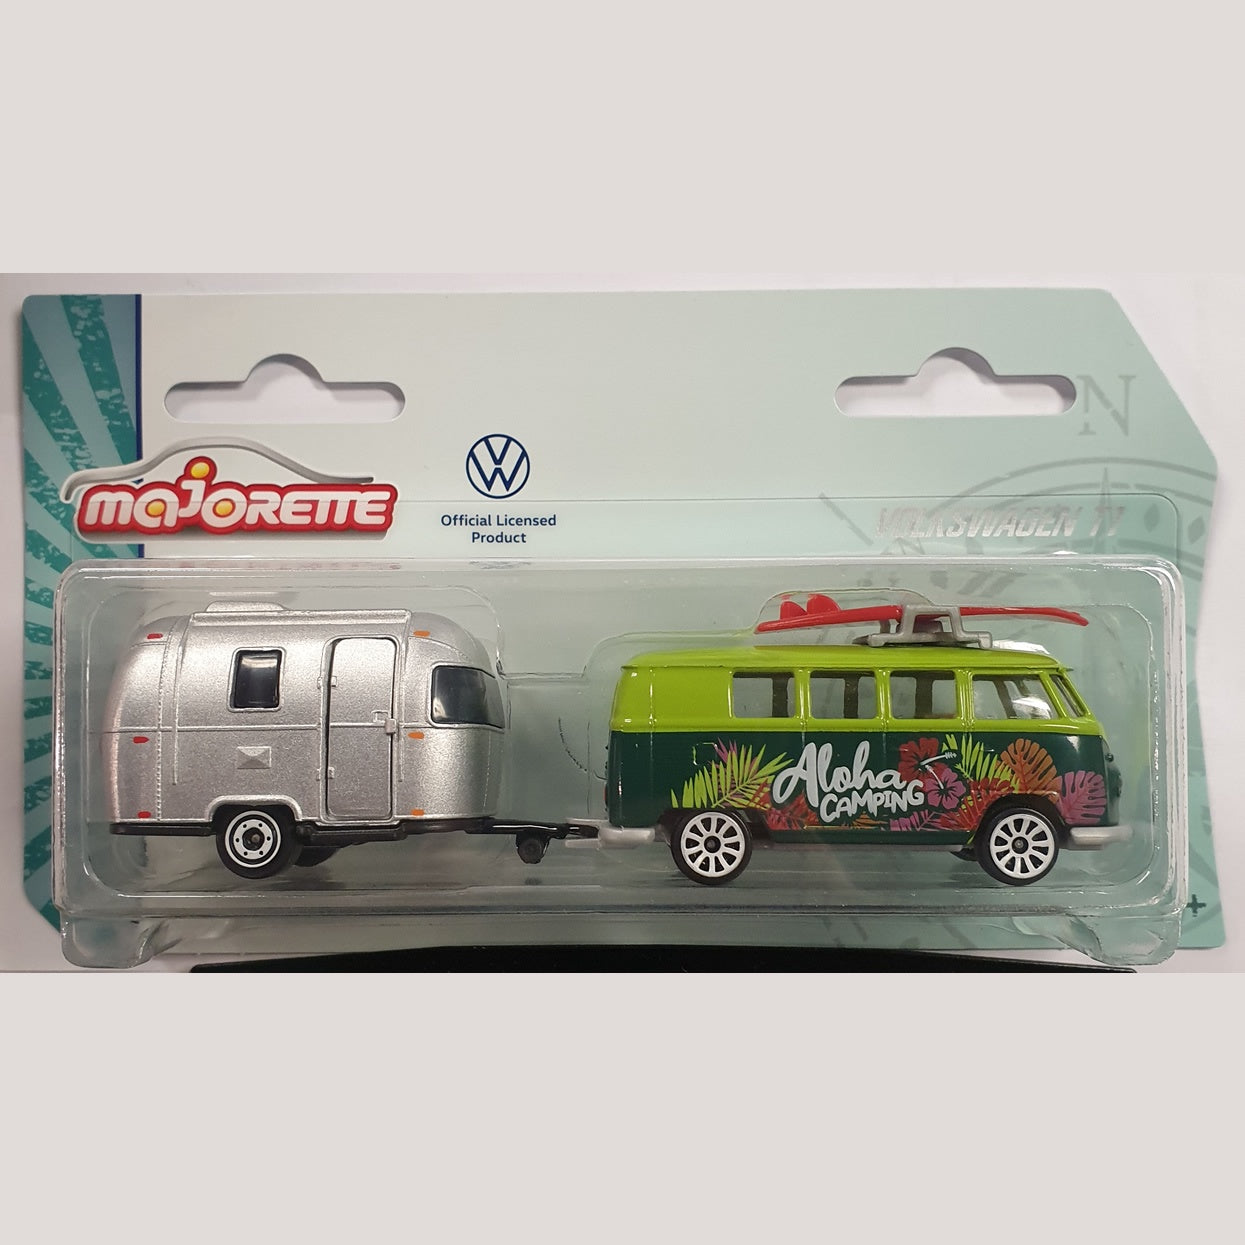 Majorette - Volkswagen Car and Trailer - VW T1 'Aloha' with Van - 1:64 Scale